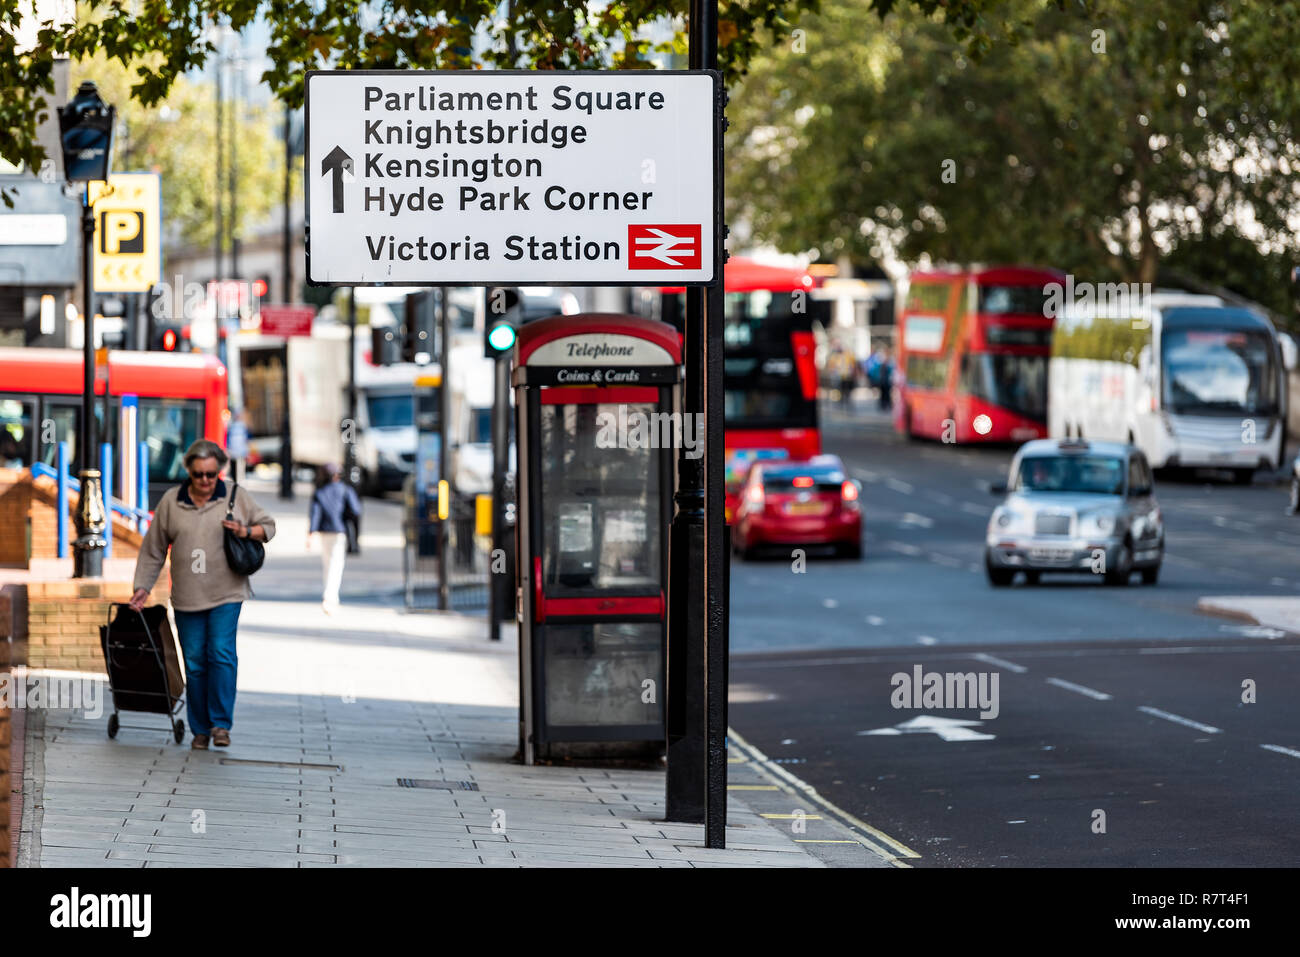 London, UK - September 15, 2018: United Kingdom, Pimlico Westminster neighborhood district, sign directions to Parliament Square, Victoria station, ur Stock Photo